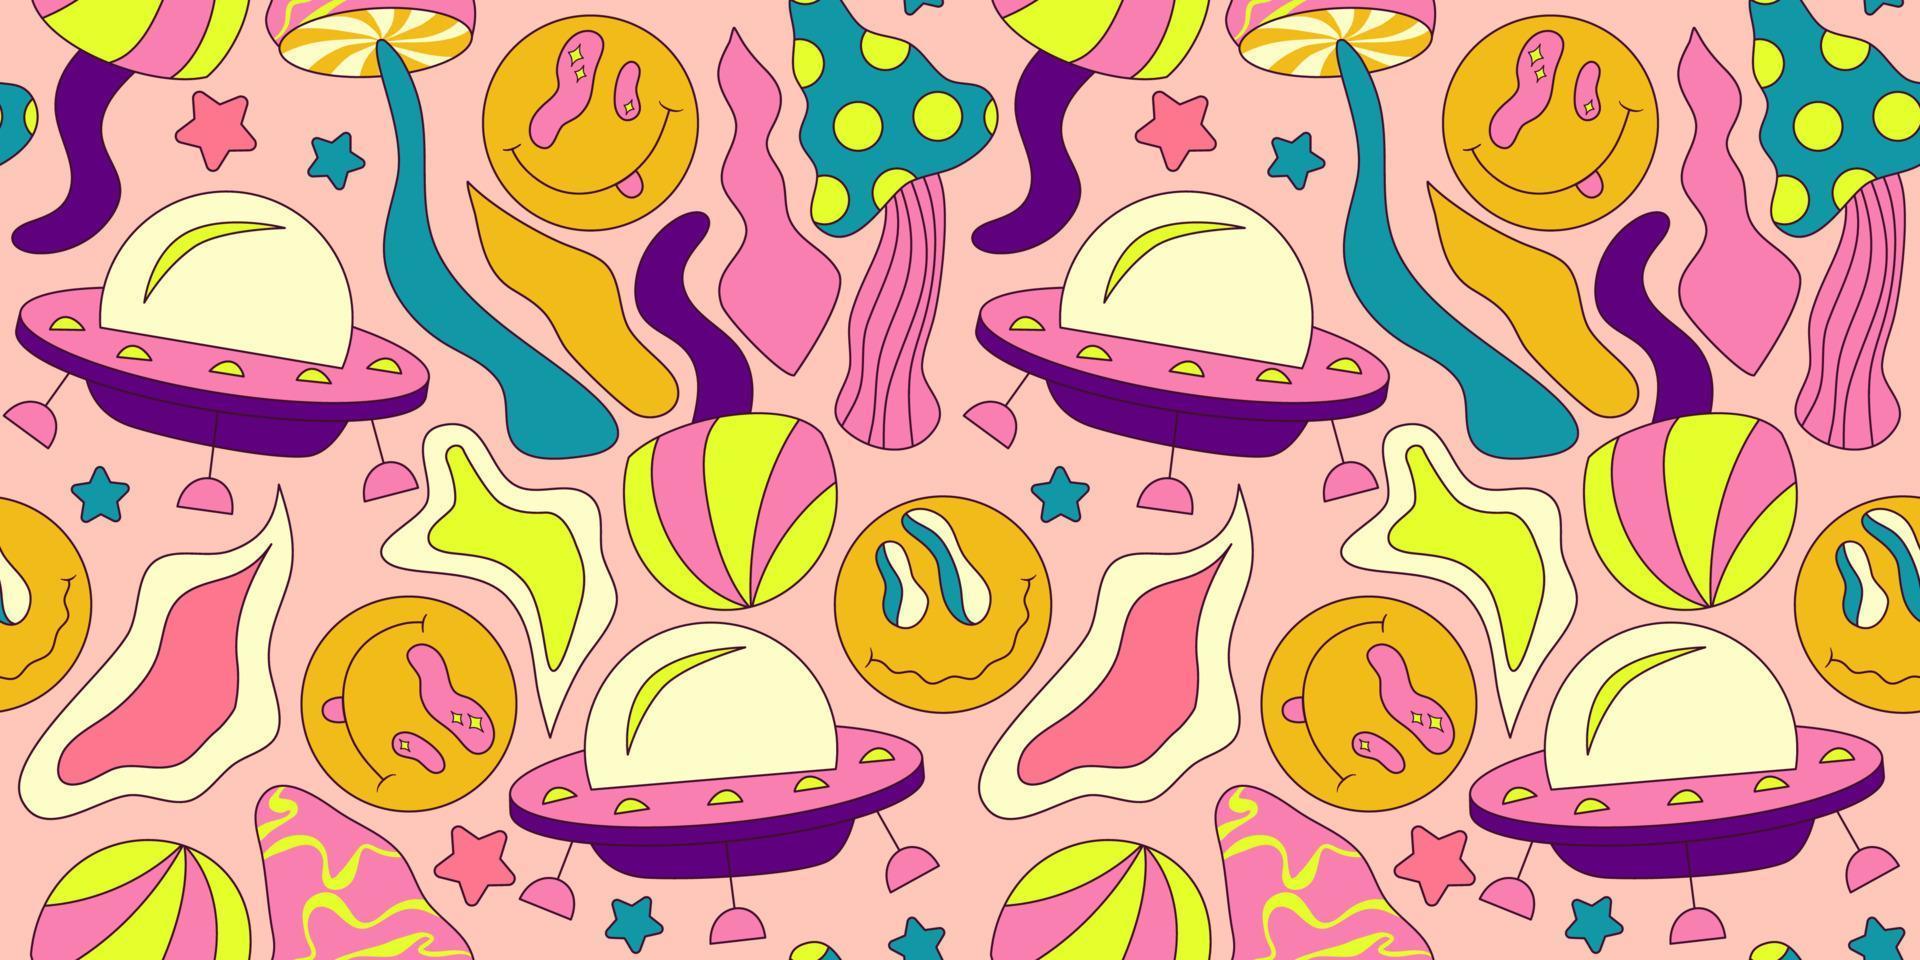 Trippy smile seamless pattern with ufo and mushroom. Psychedelic hippy groovy print. Good 60s, 70s, mood. Vector trippy crazy illustration. Smile face seamless pattern y2k style